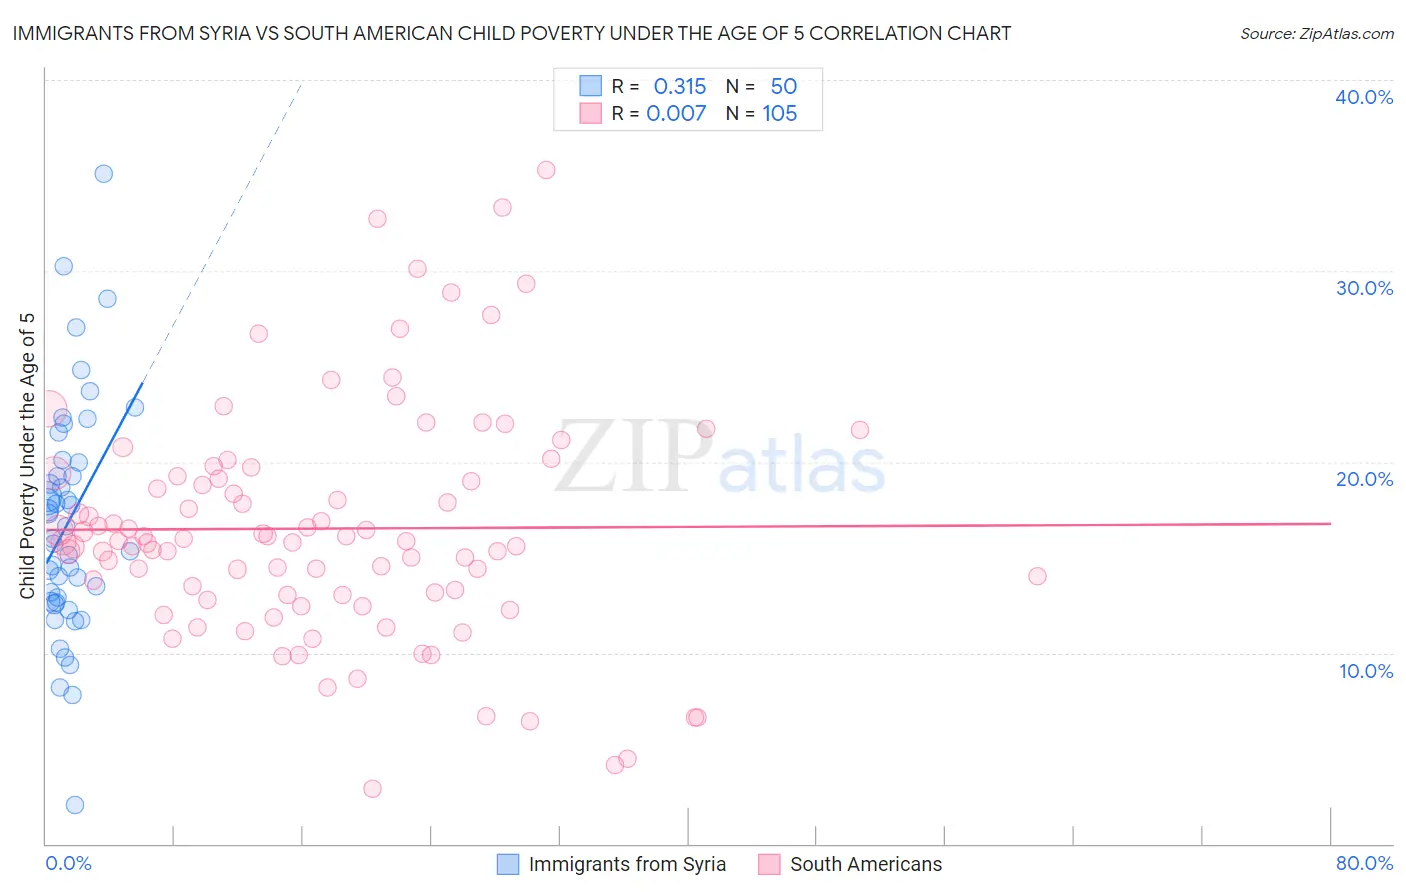 Immigrants from Syria vs South American Child Poverty Under the Age of 5